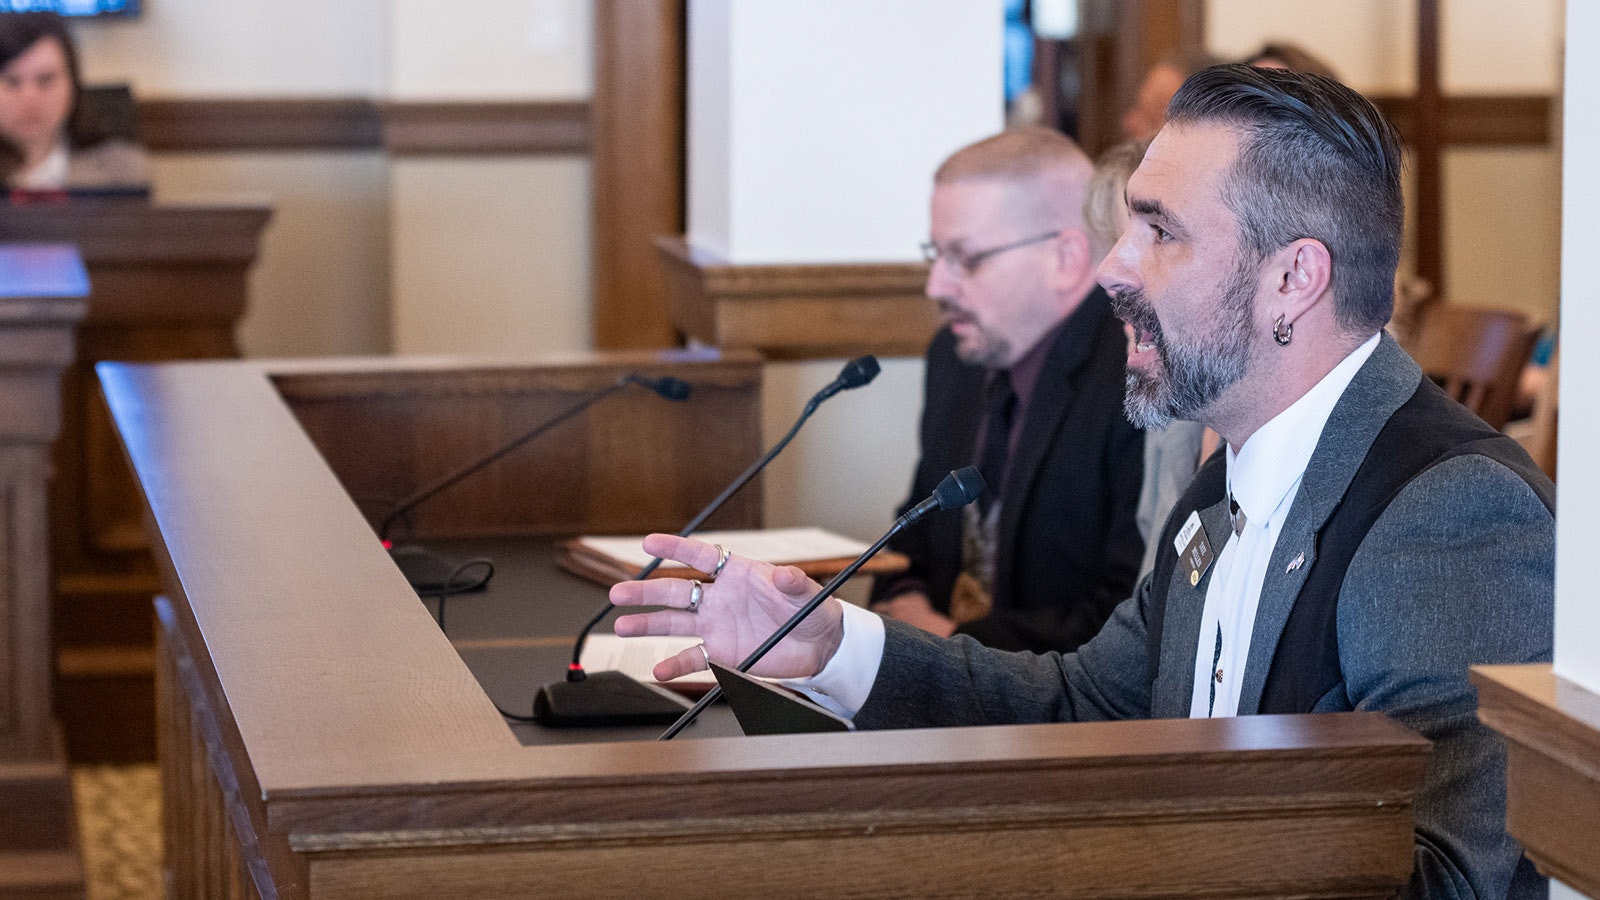 Tate Mullen, government relations director for the Wyoming Education Association, testifies against a bill that would establish an education savings account in Wyoming.